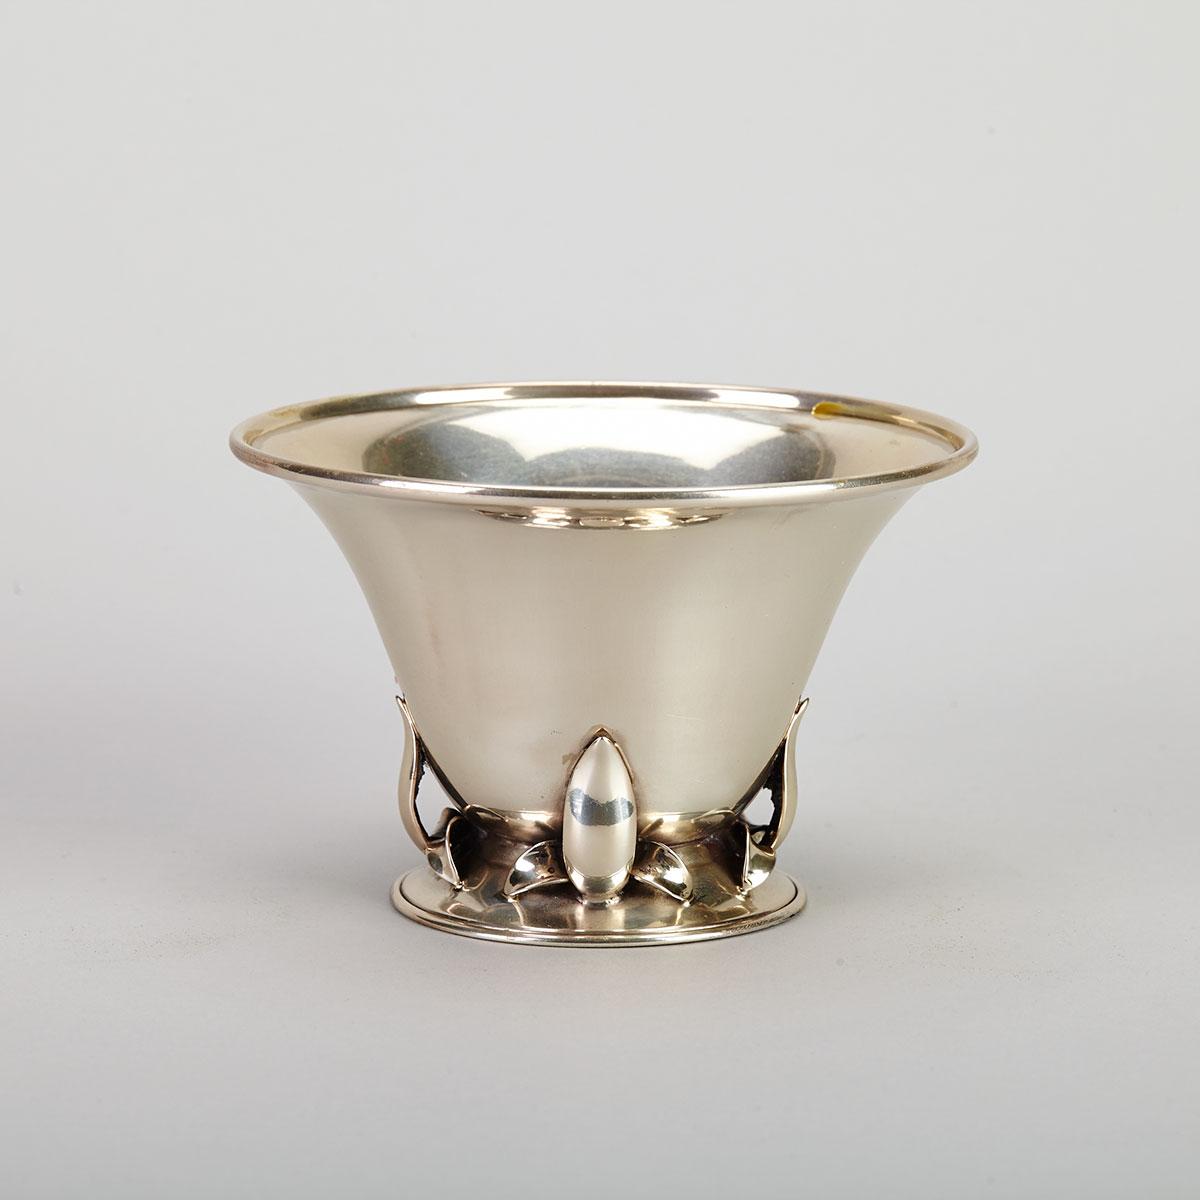 Canadian Silver Steep Sided Bowl, Carl Poul Petersen, Montreal, Que., mid-20th century